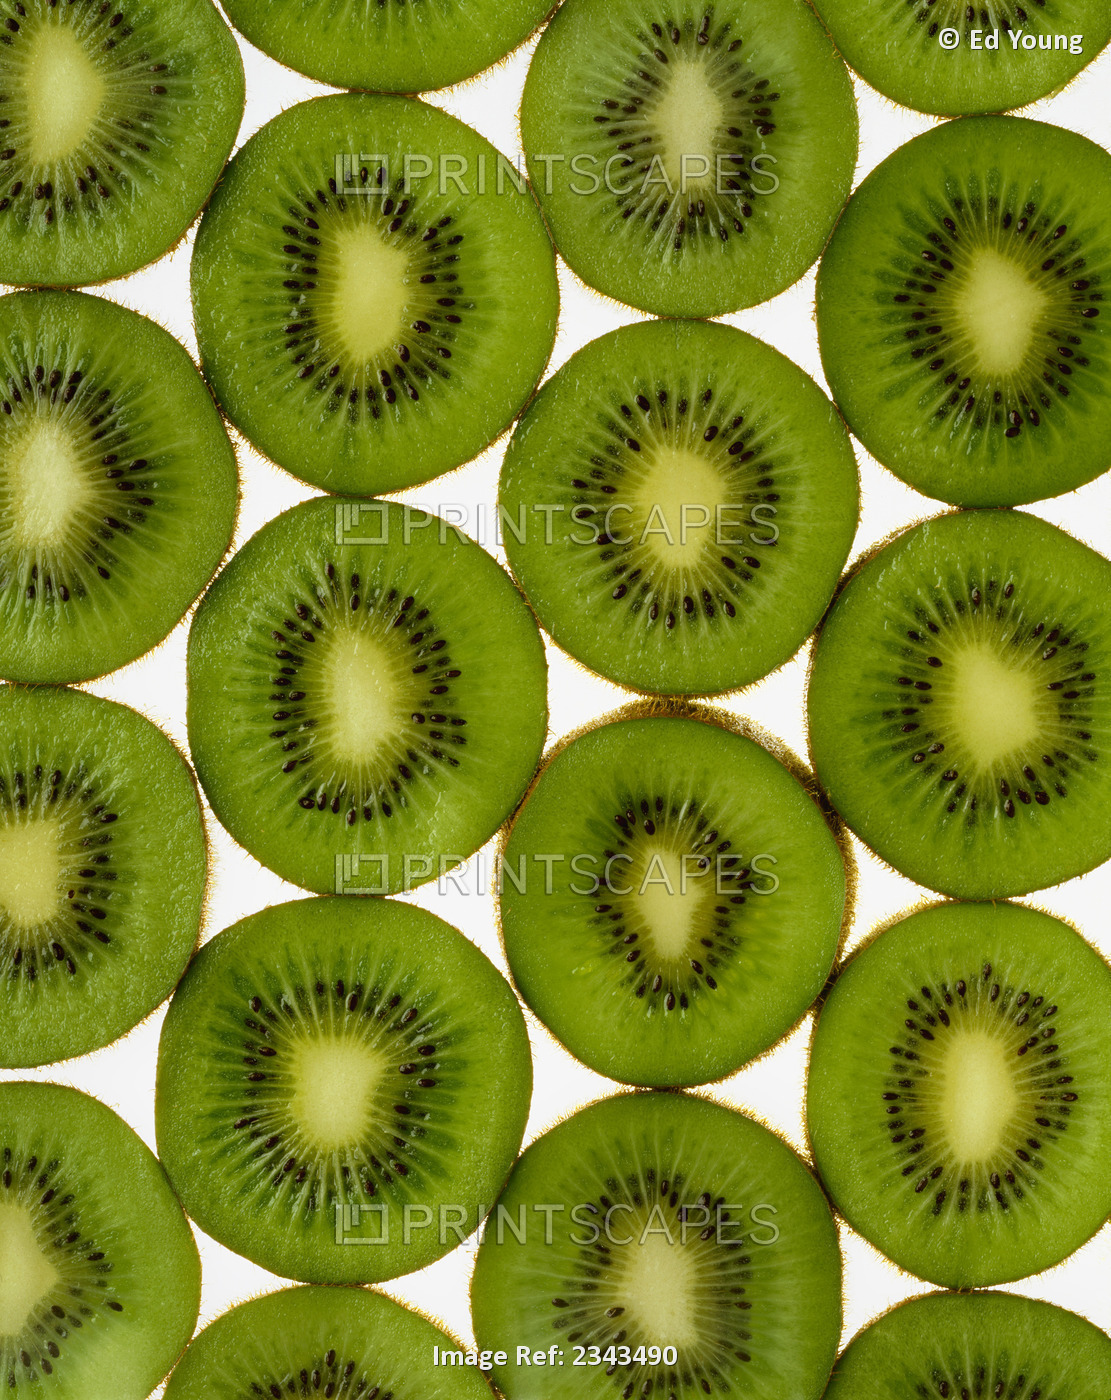 Agriculture - Kiwi slices arranged in rows and backlit, studio. Version 2.